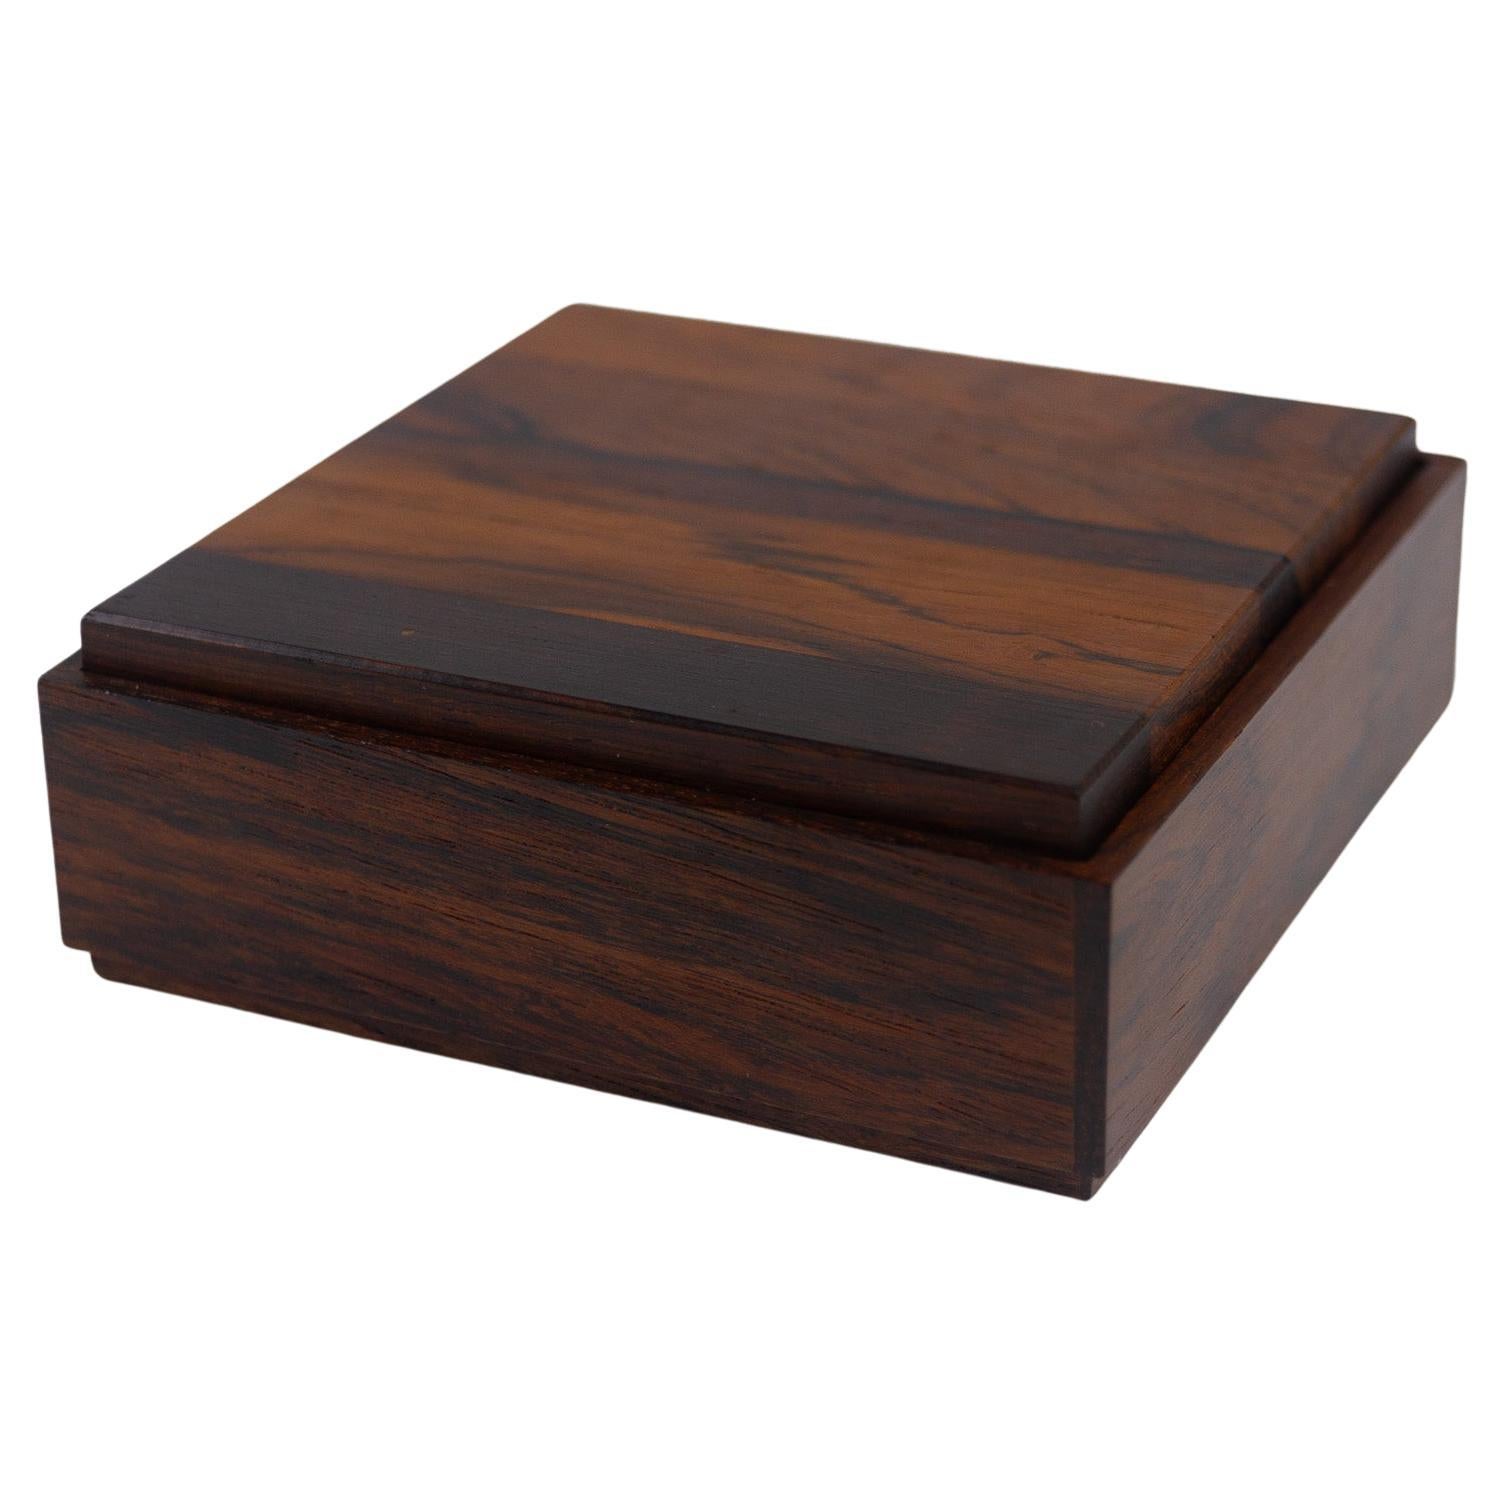 Vintage Danish Rosewood Box, 1960s For Sale